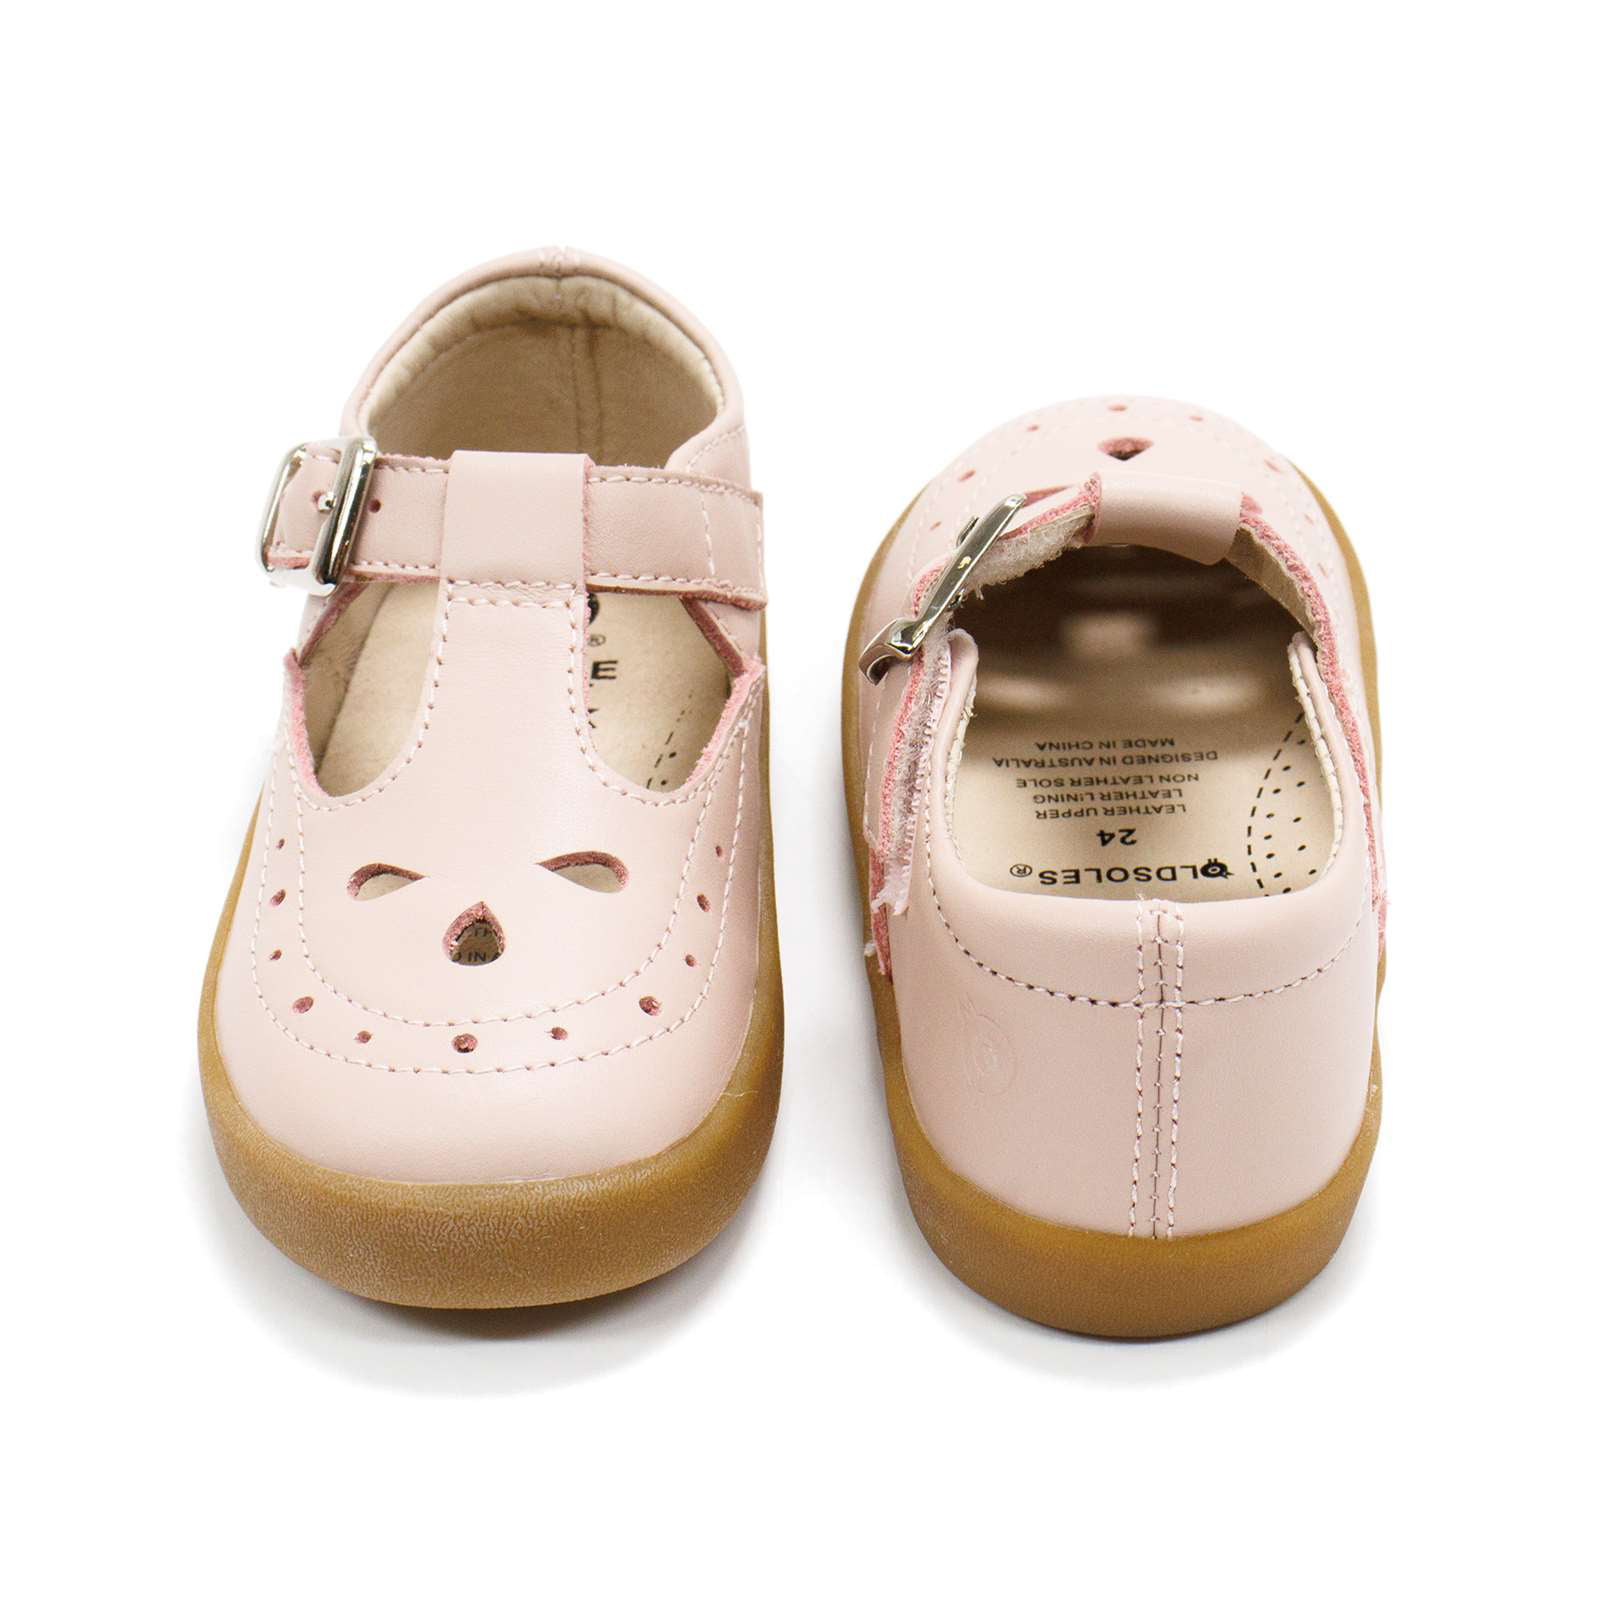 Old Soles Toddlers Royal Shoes, Pearl \ Gum Sole,28 EU (11 US) M